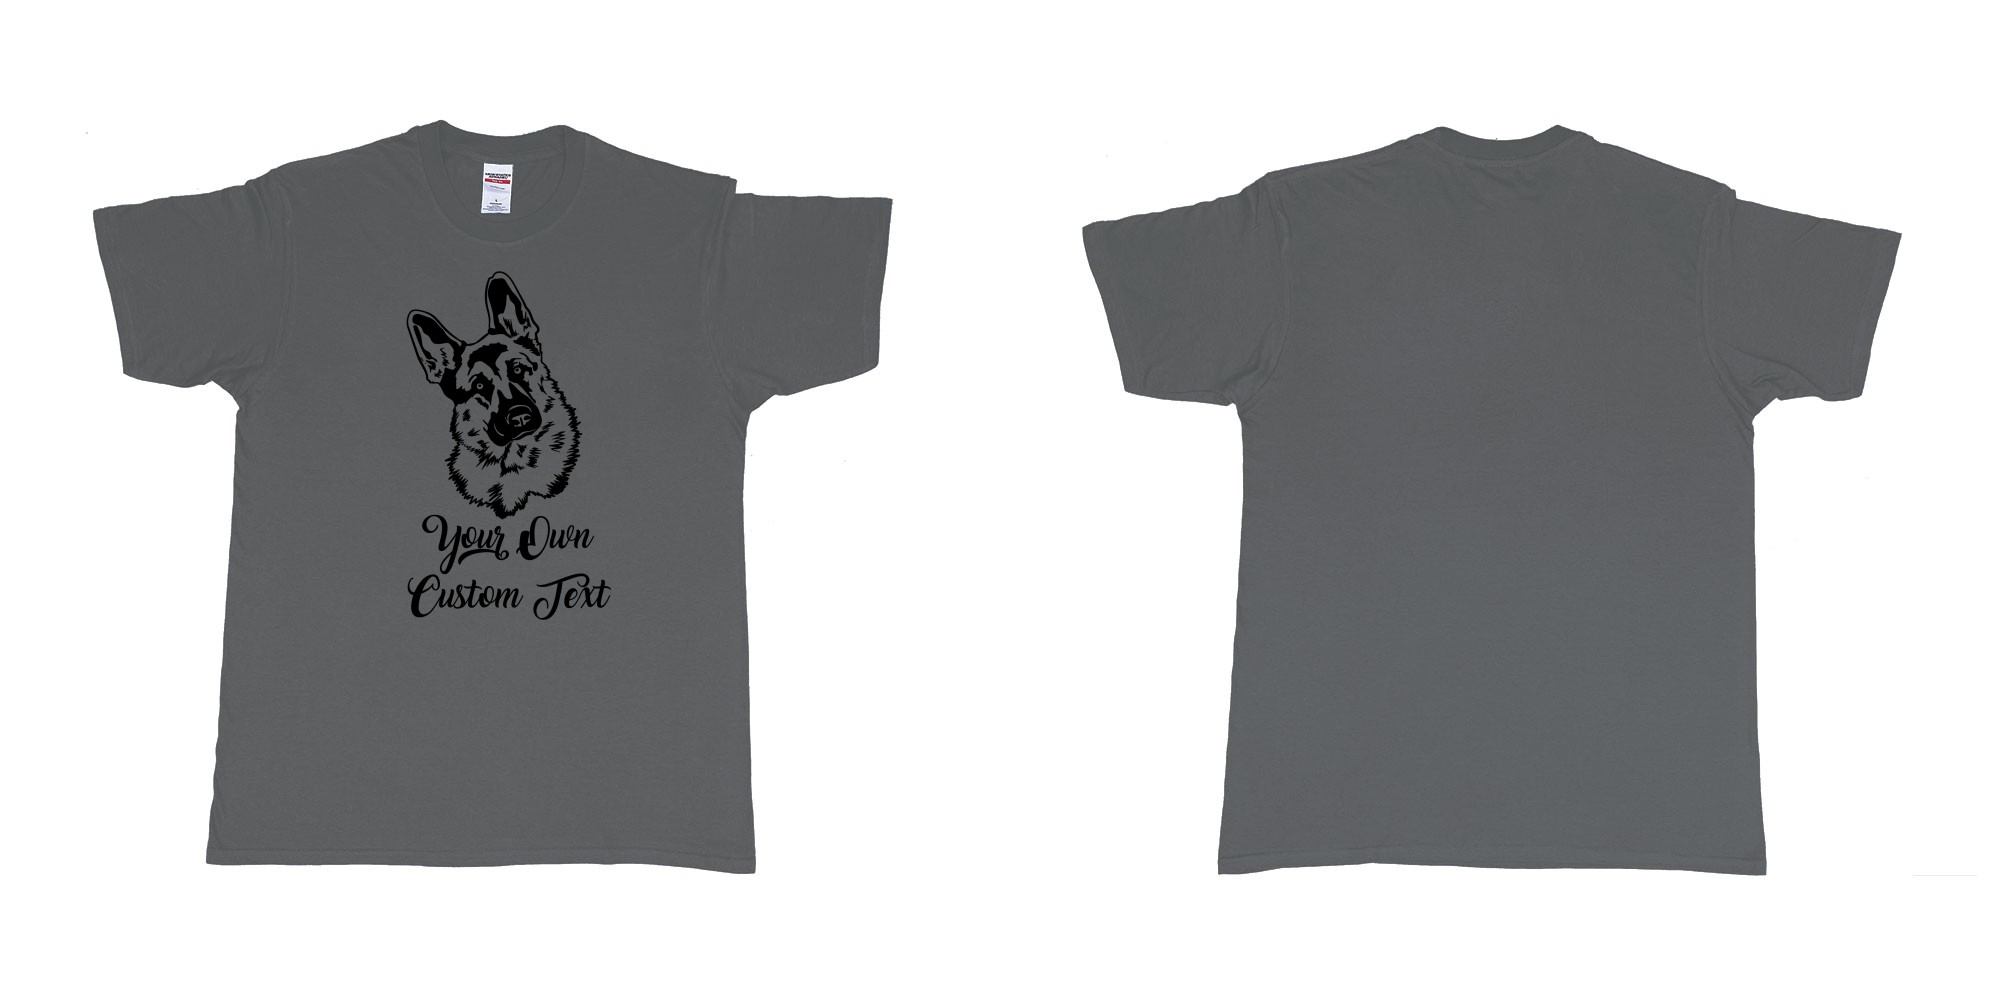 Custom tshirt design zack german shepherd tilts its head your own custom text in fabric color charcoal choice your own text made in Bali by The Pirate Way